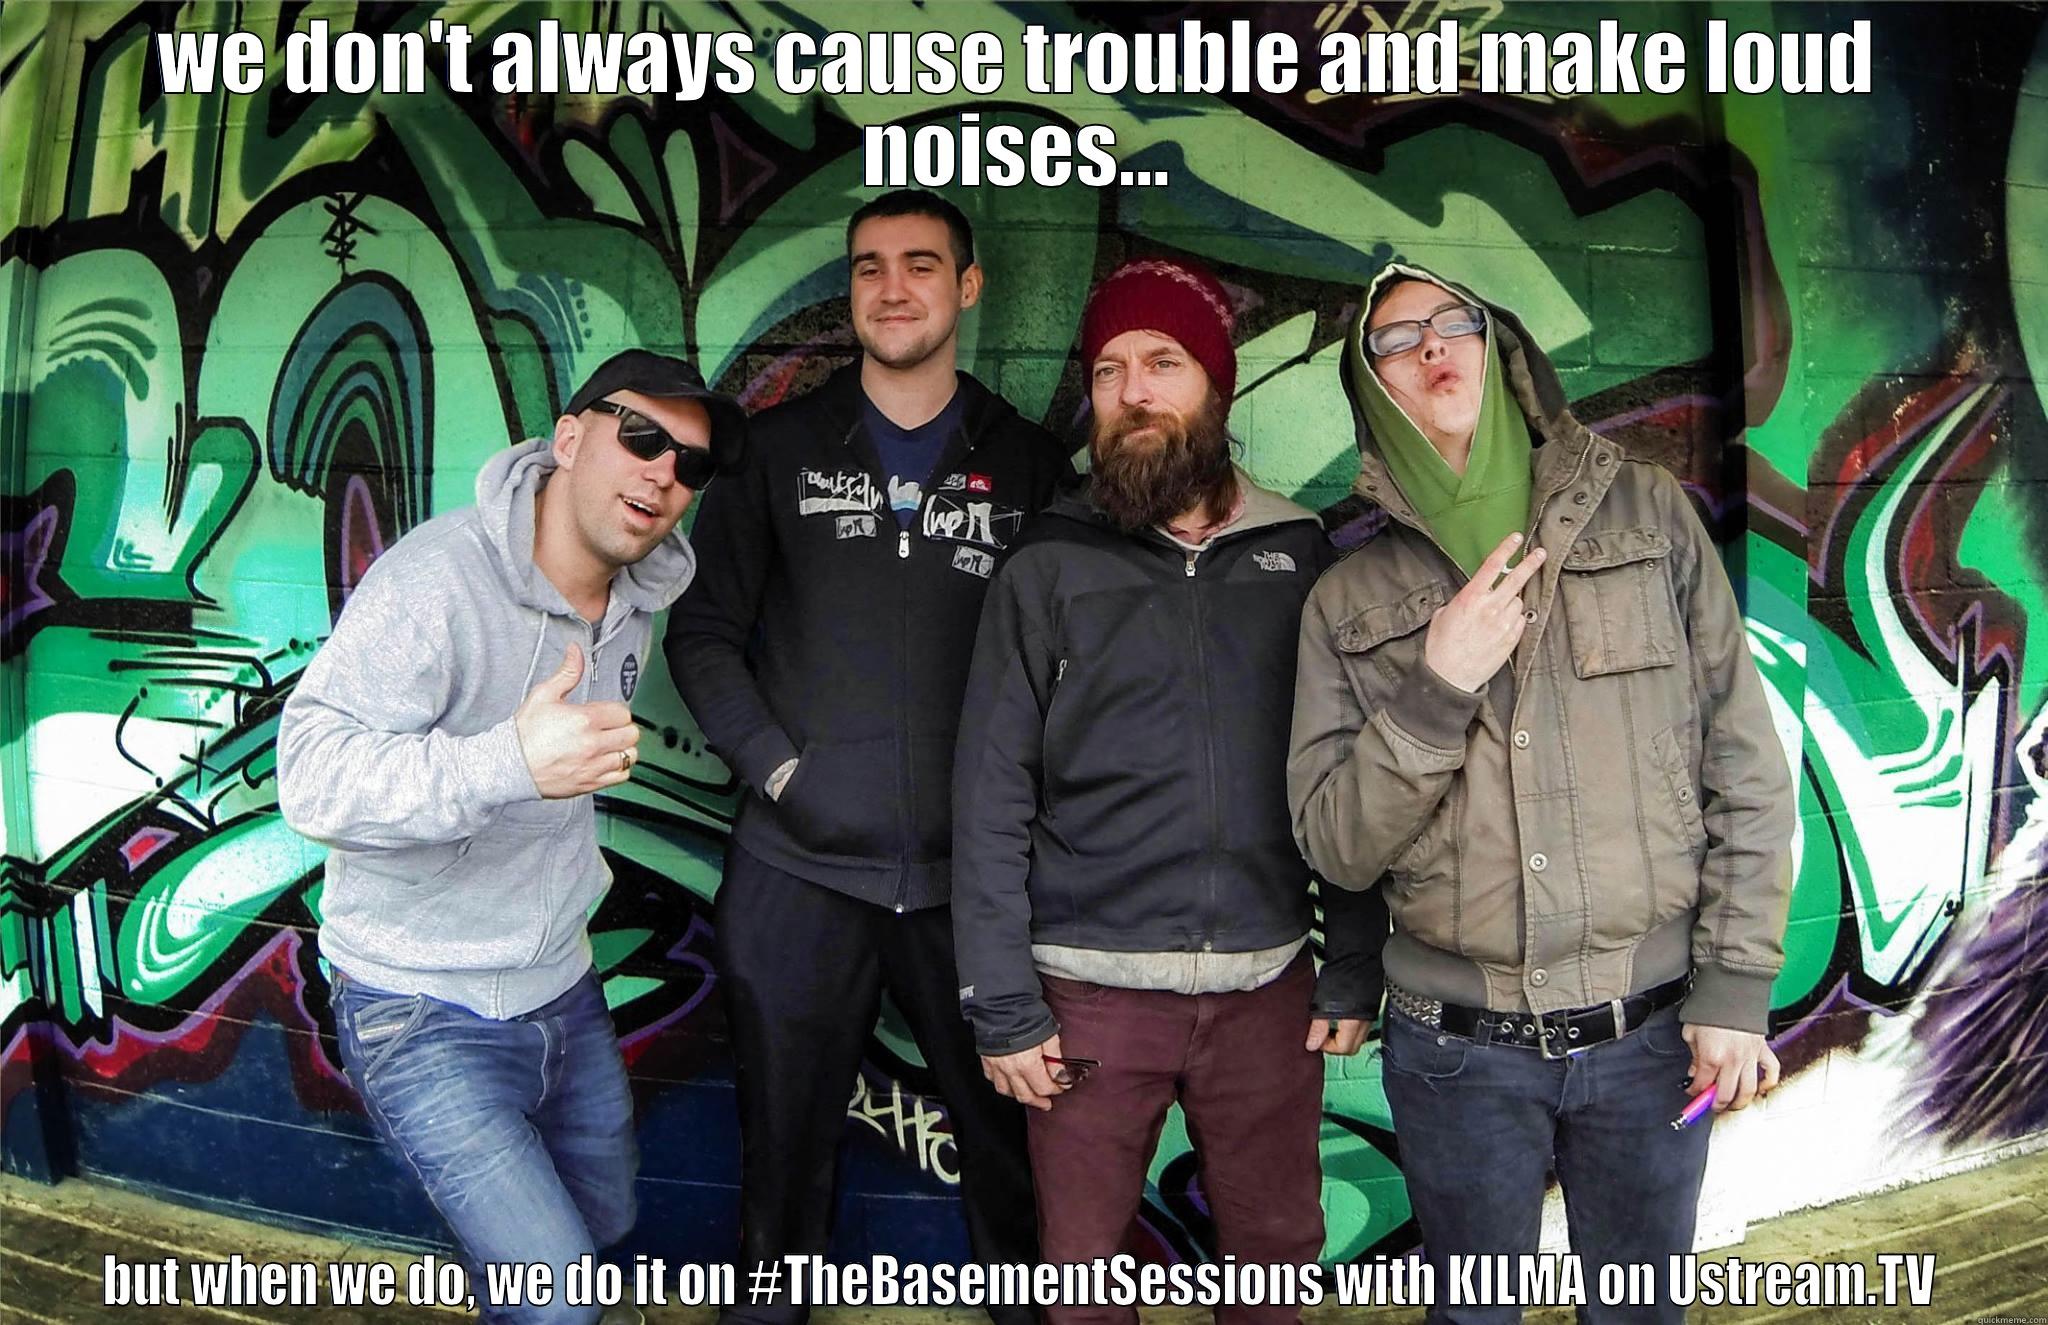 WE DON'T ALWAYS CAUSE TROUBLE AND MAKE LOUD NOISES... BUT WHEN WE DO, WE DO IT ON #THEBASEMENTSESSIONS WITH KILMA ON USTREAM.TV Misc